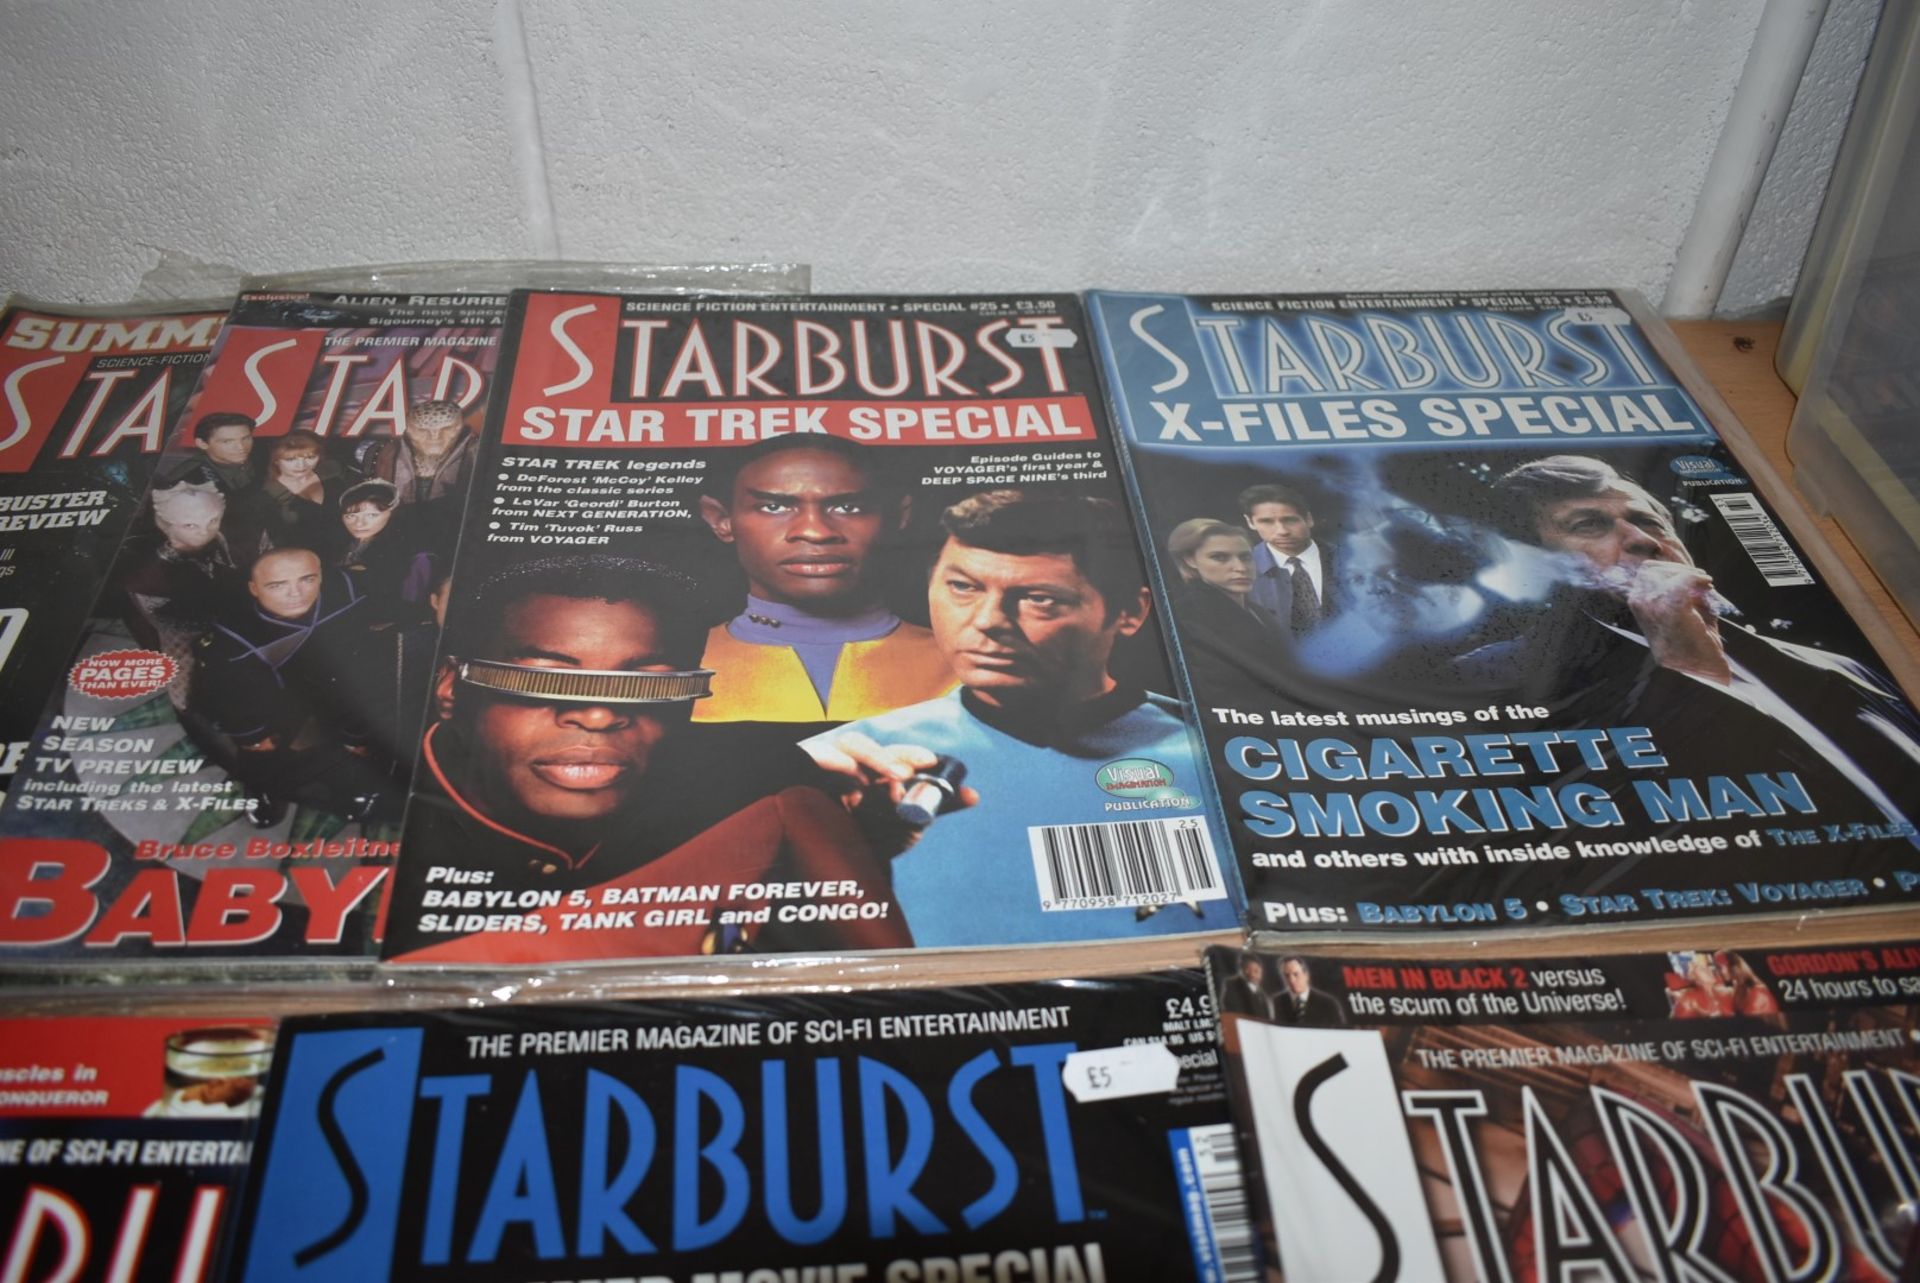 17 x Starburst Film Magazines Movie New and Reviews - Issues From 21 to 285 Included - Ref MB143 - - Image 3 of 8